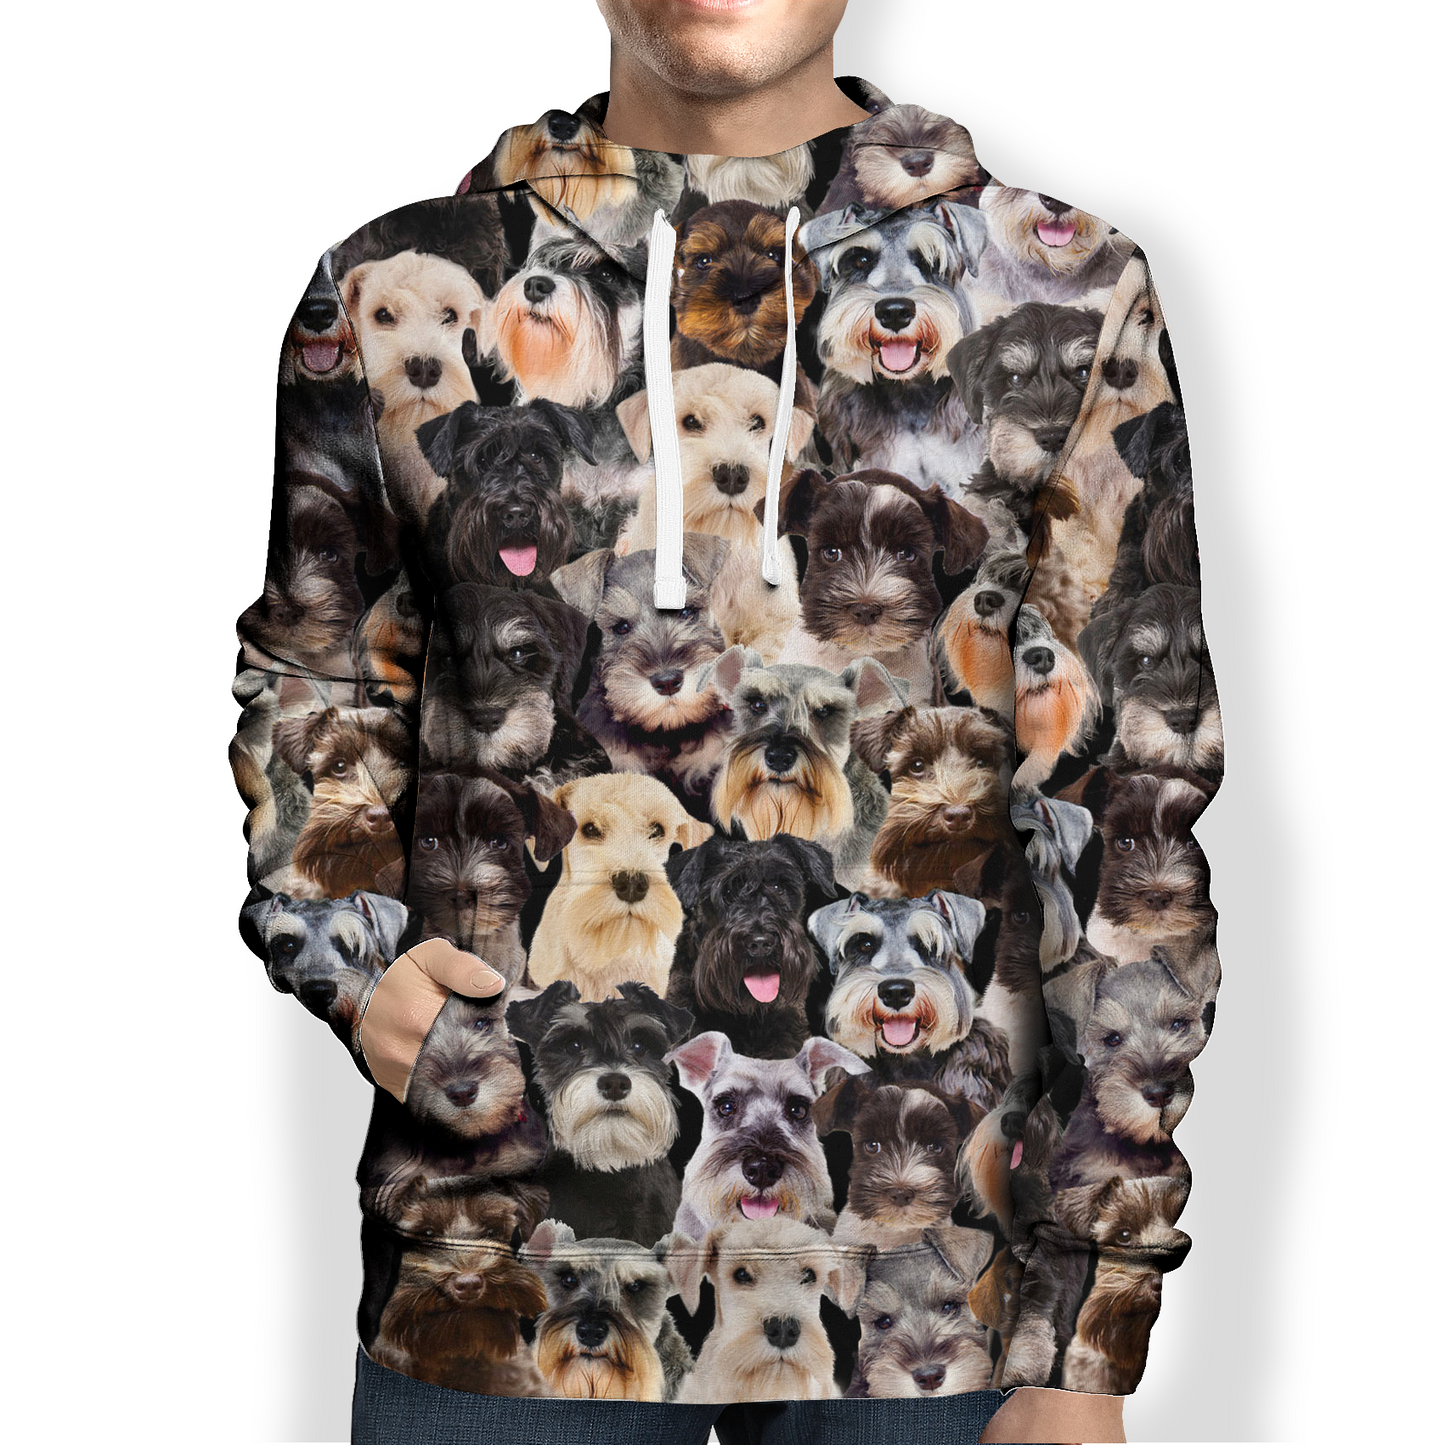 You Will Have A Bunch Of Schnauzers - Hoodie V1